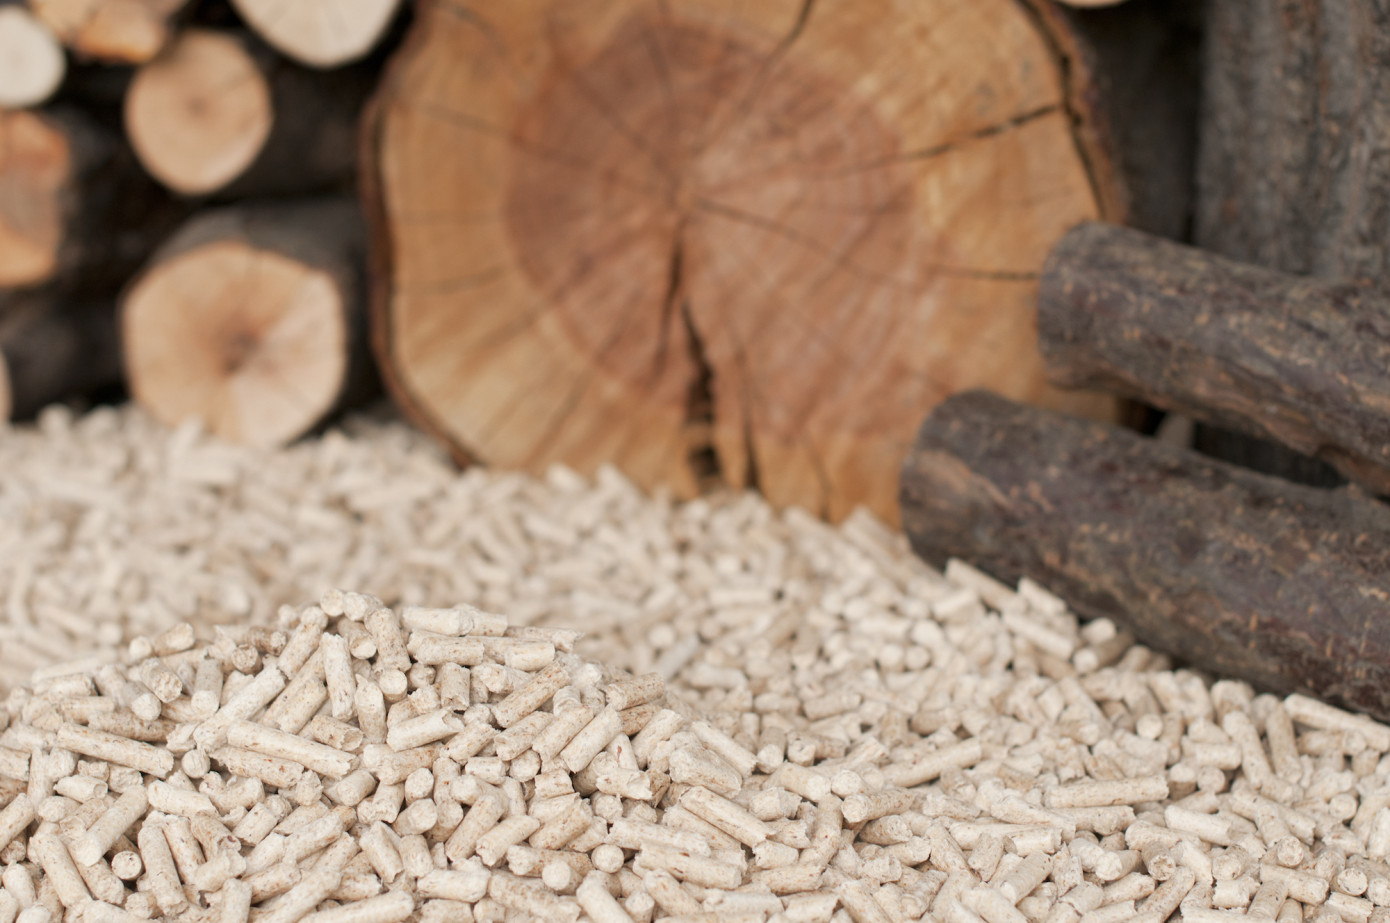 Exports of wood pellets from Vietnam to South Korea grow 27% in April